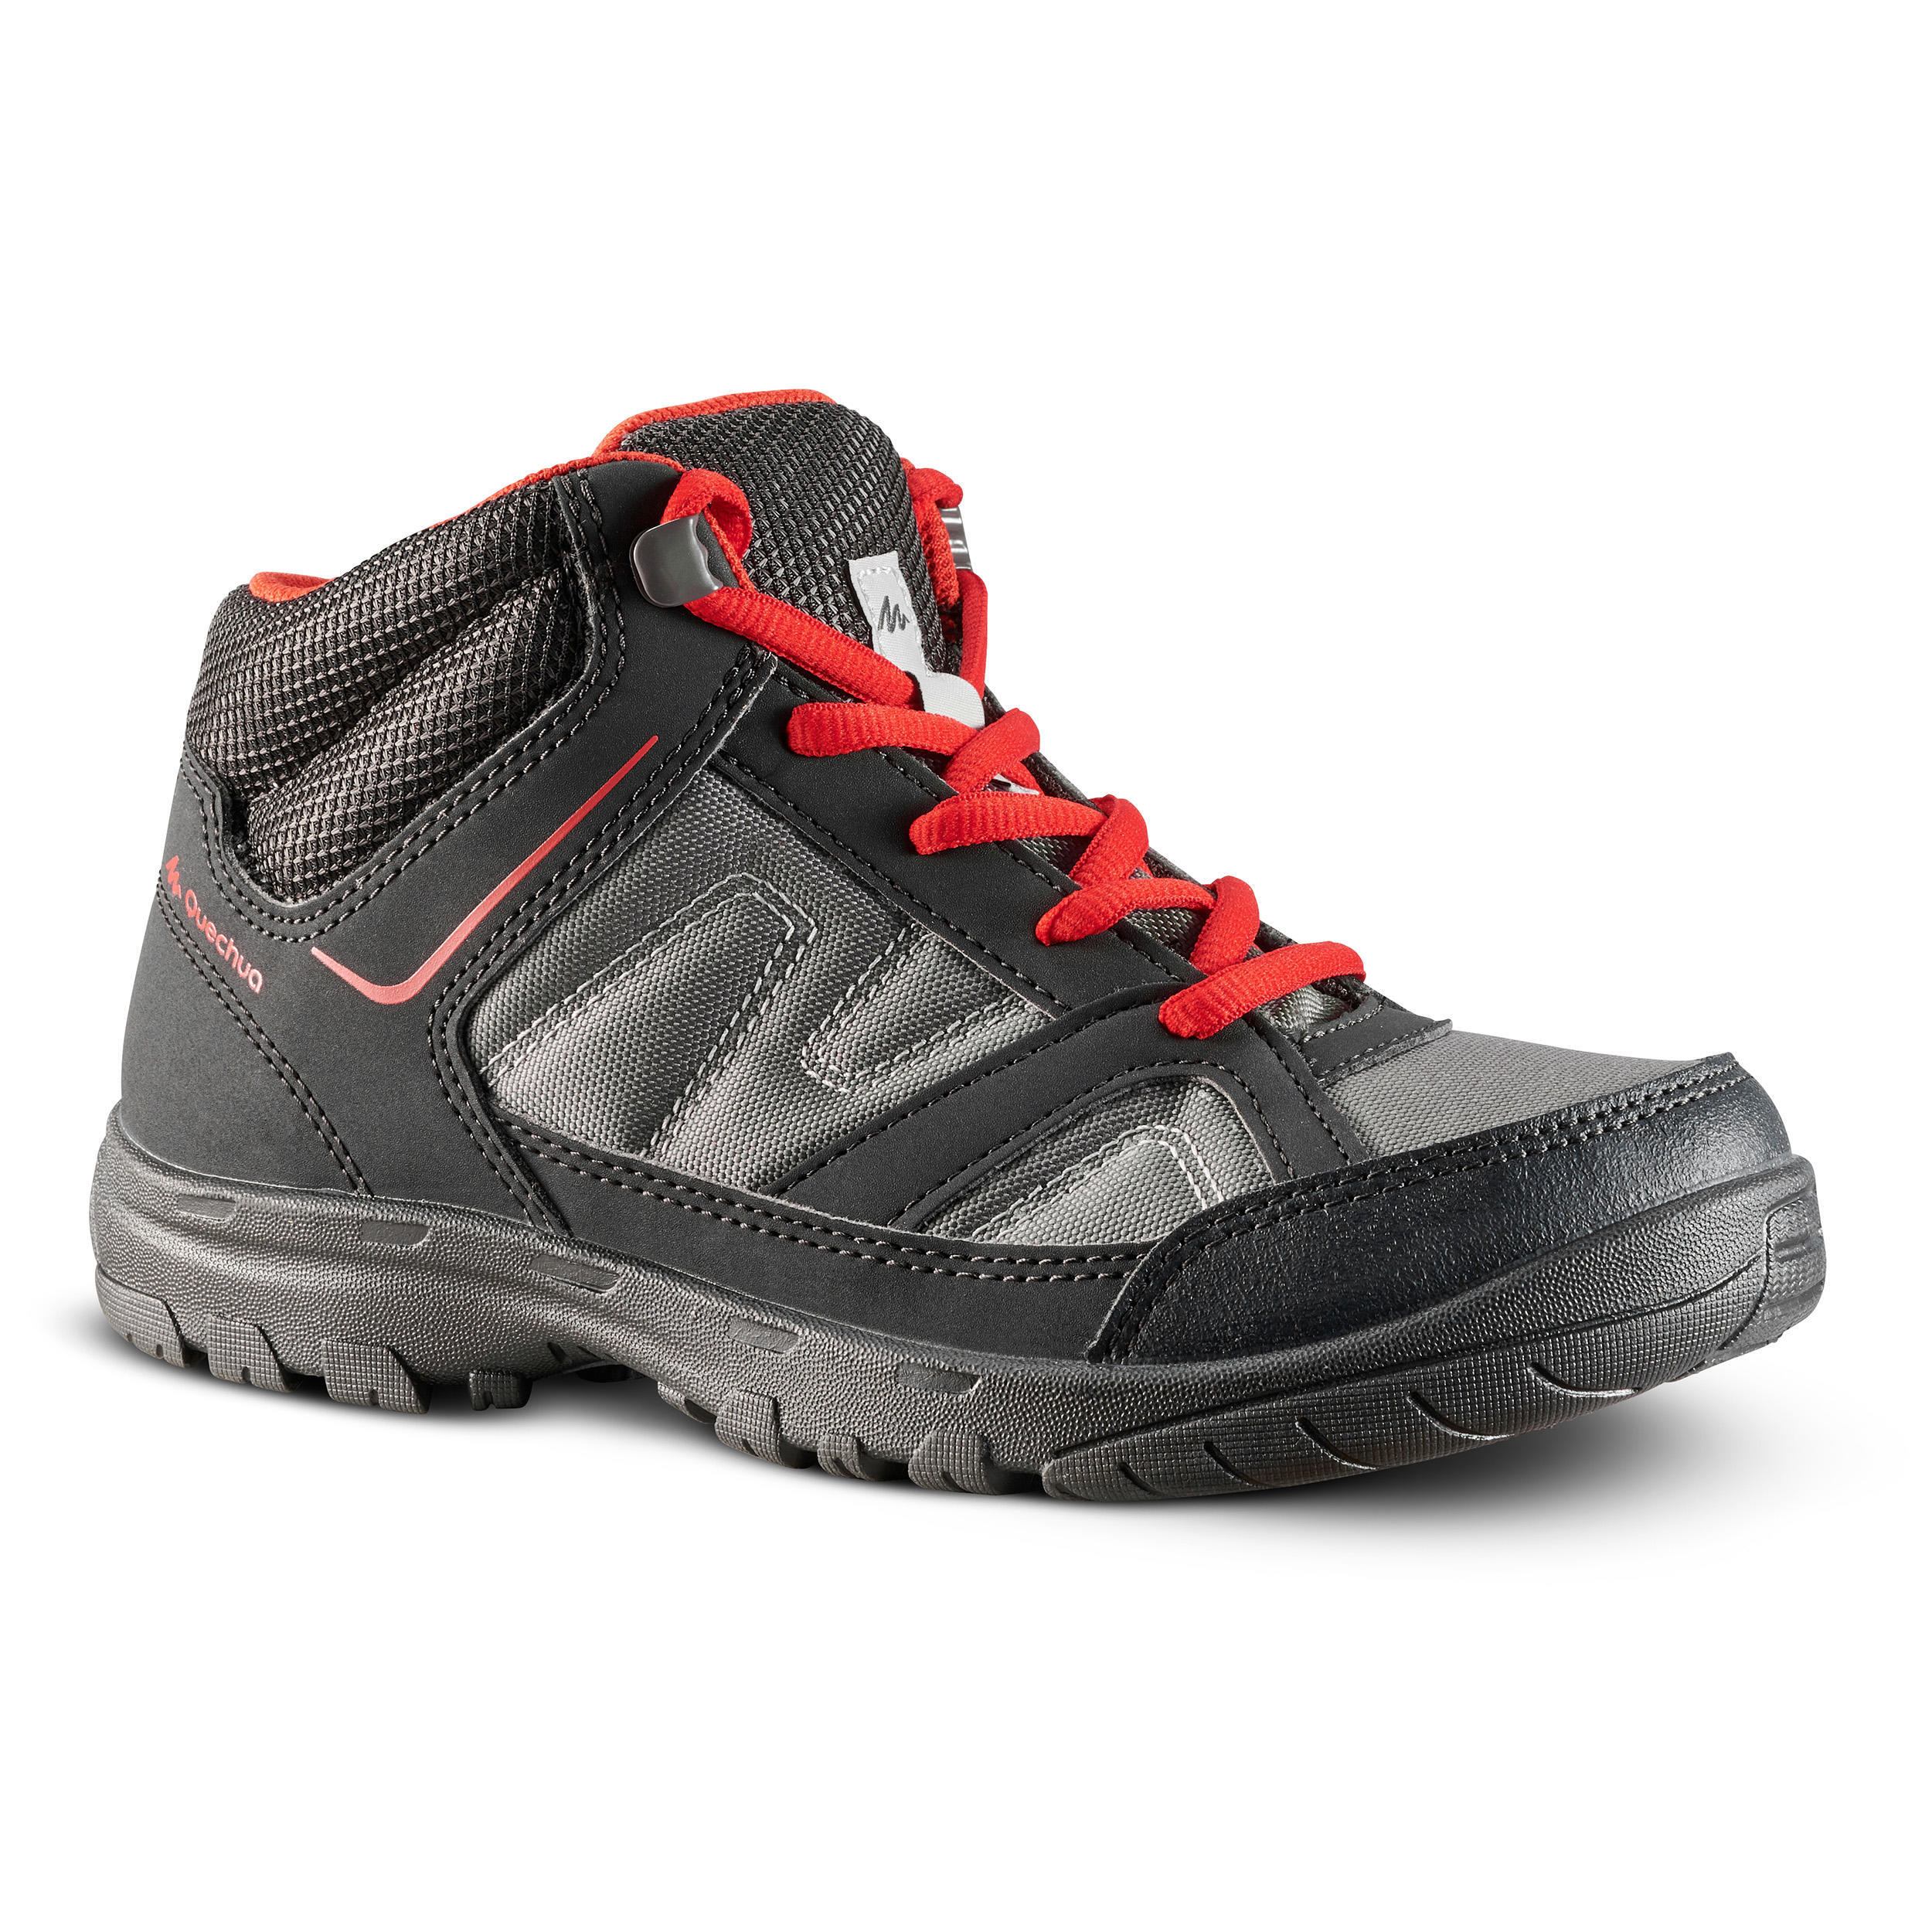 QUECHUA Kids Hiking Boots 35 TO 38 Mid JR MH100 - Black/Red